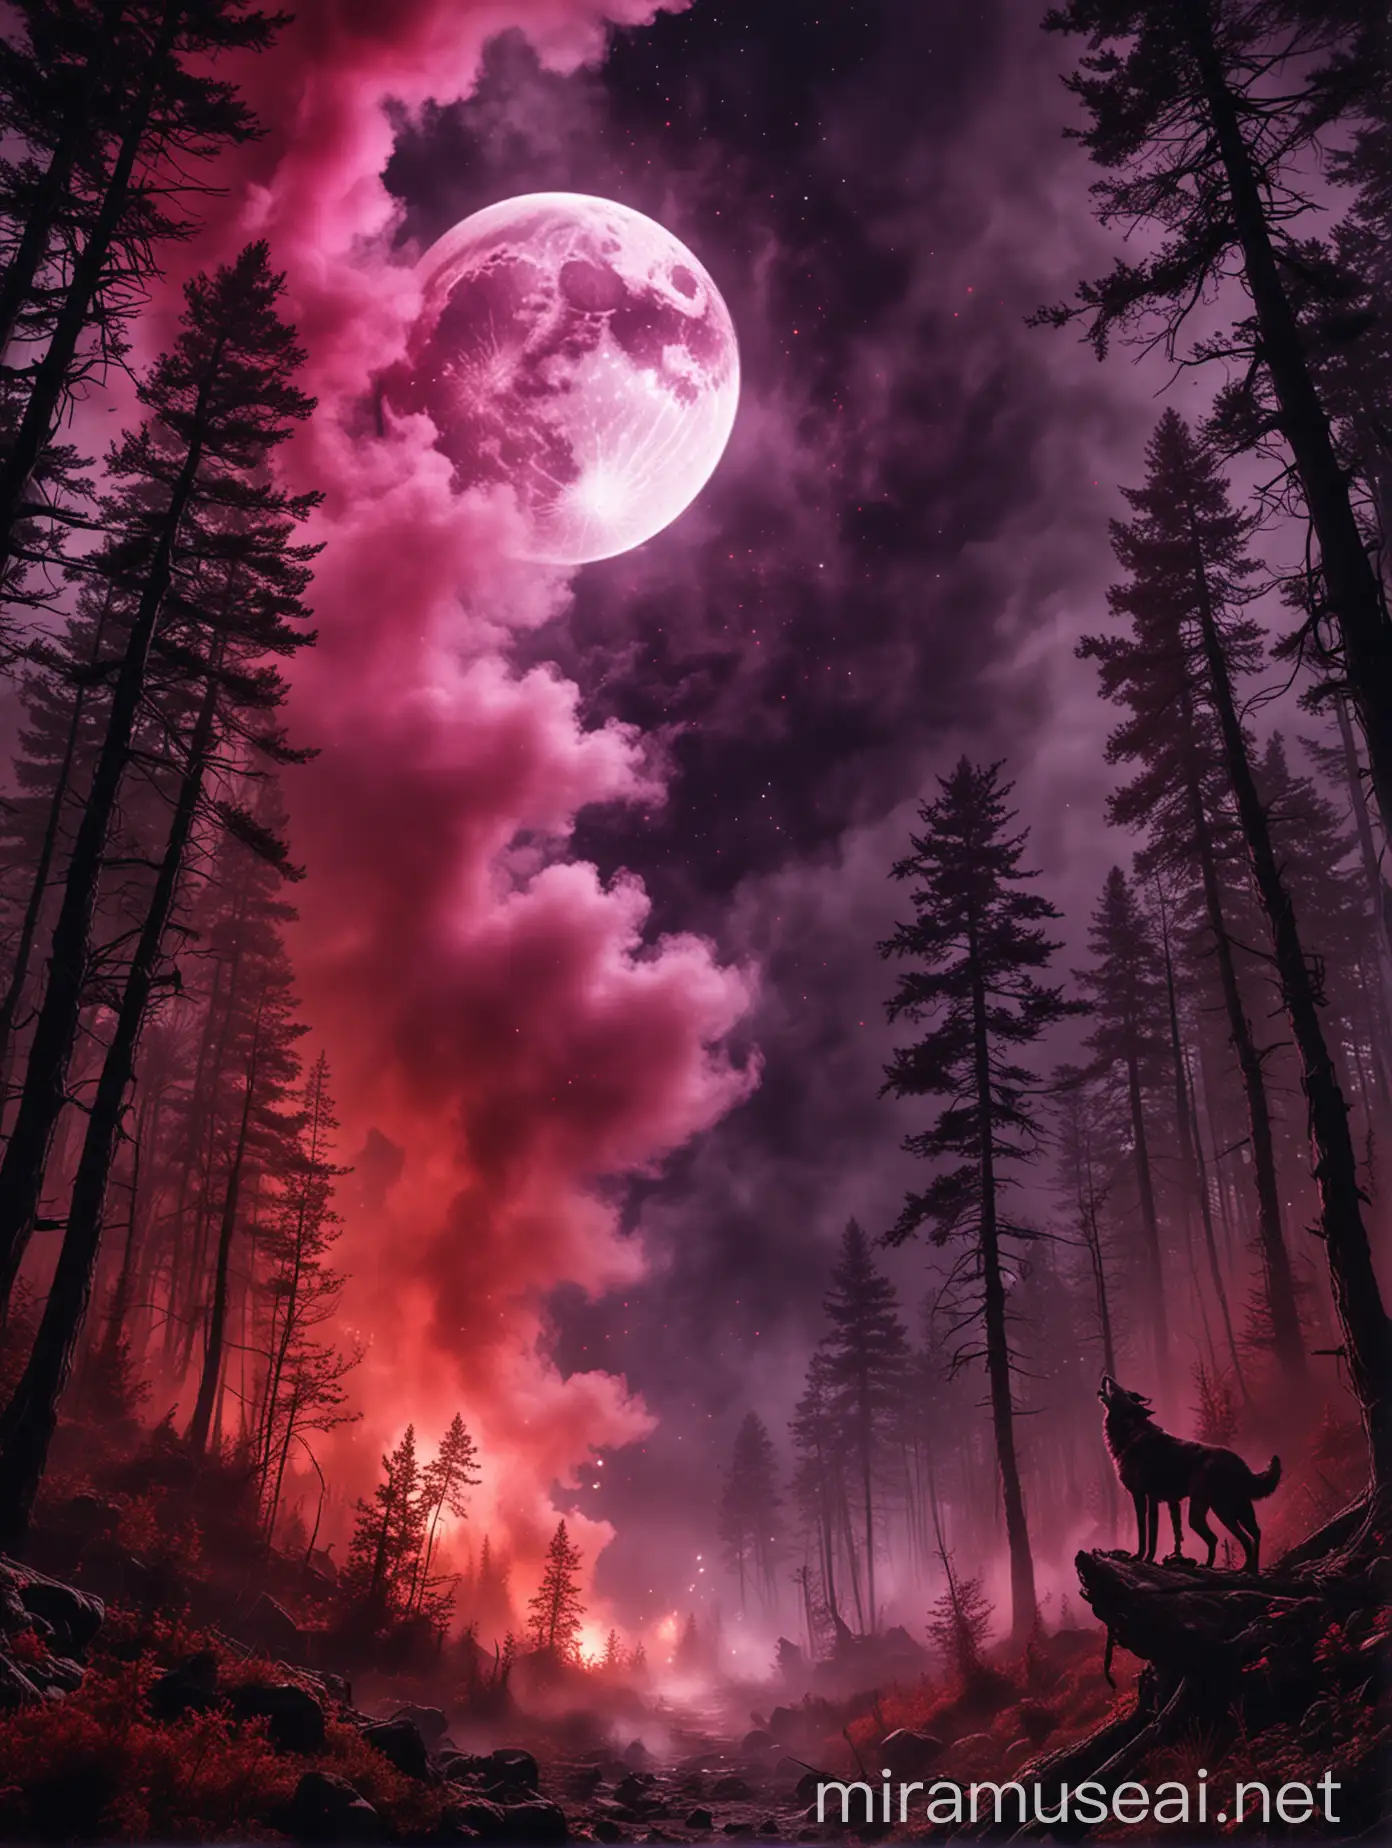 Eerie Forest Moonlit Night with Werewolves Emerging from Red and Purple Smoke